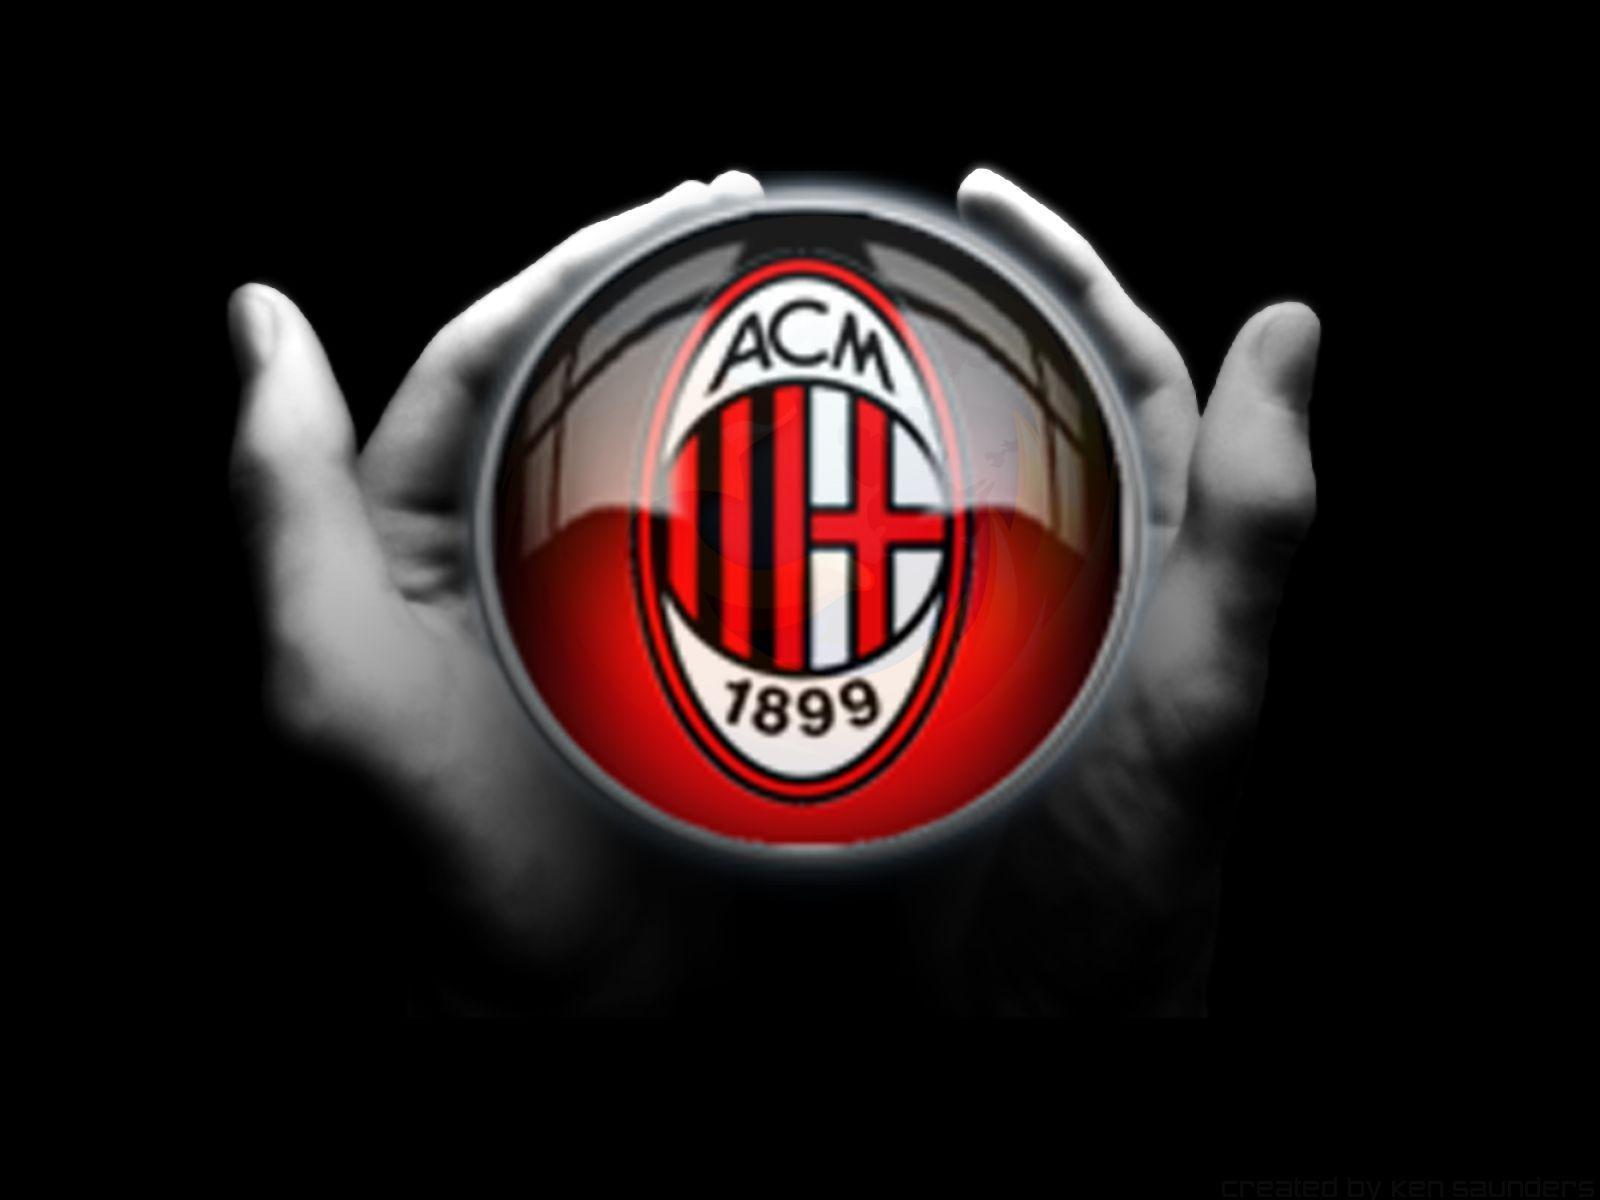 AC Milan HD Wallpaper for Desktop, iPhone, iPad, and Android